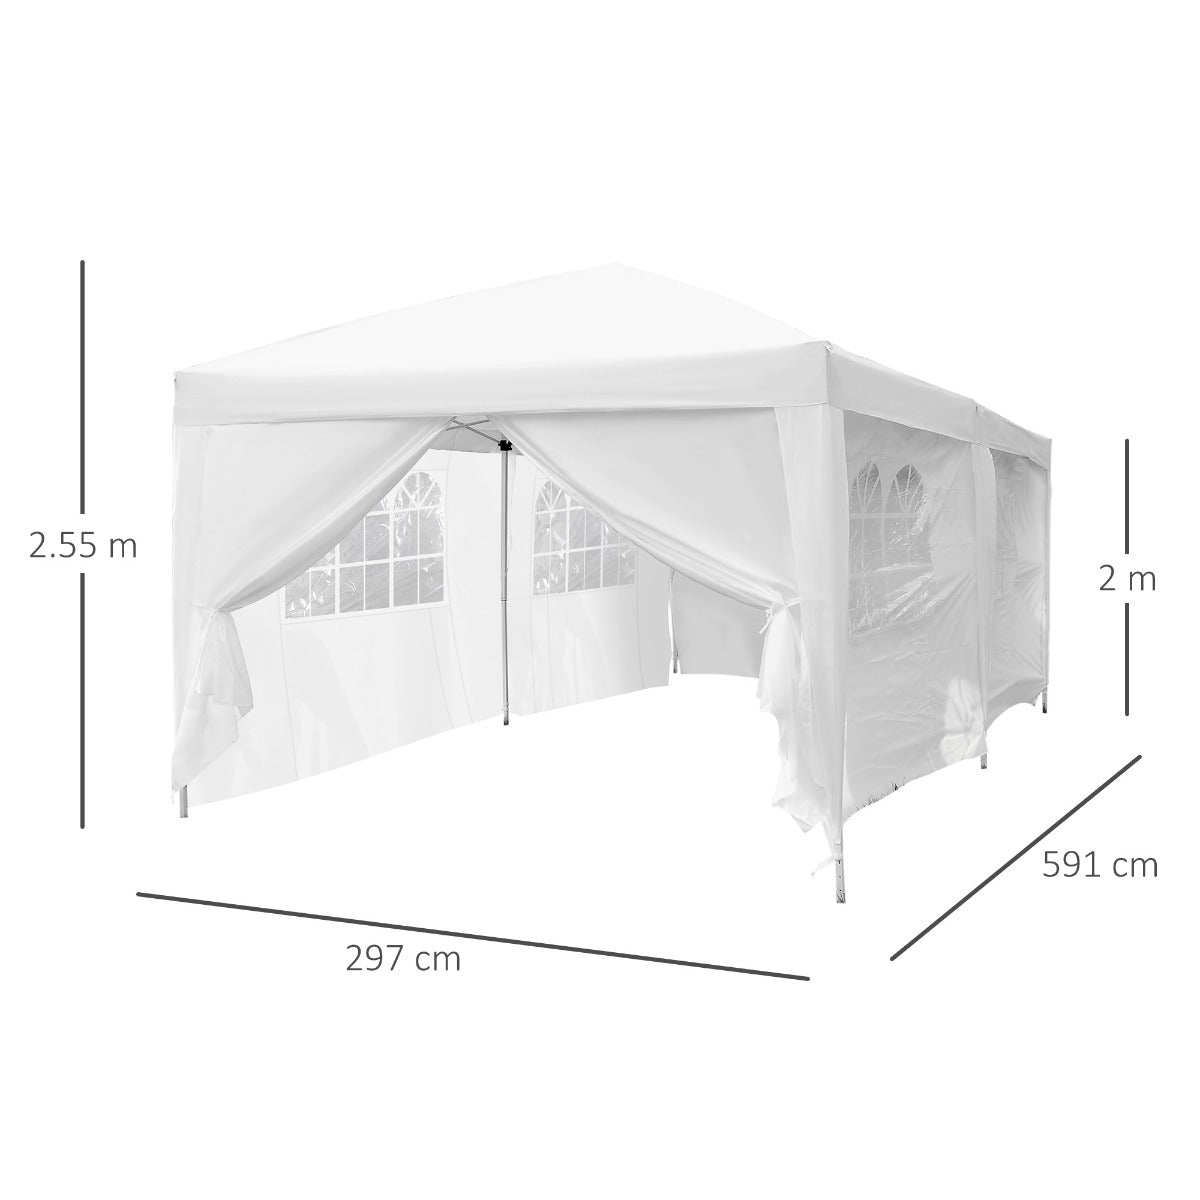 Outsunny 3 x 6m Garden Heavy Duty Water Resistant Pop Up Gazebo Marquee Party Tent Wedding Canopy Awning-White